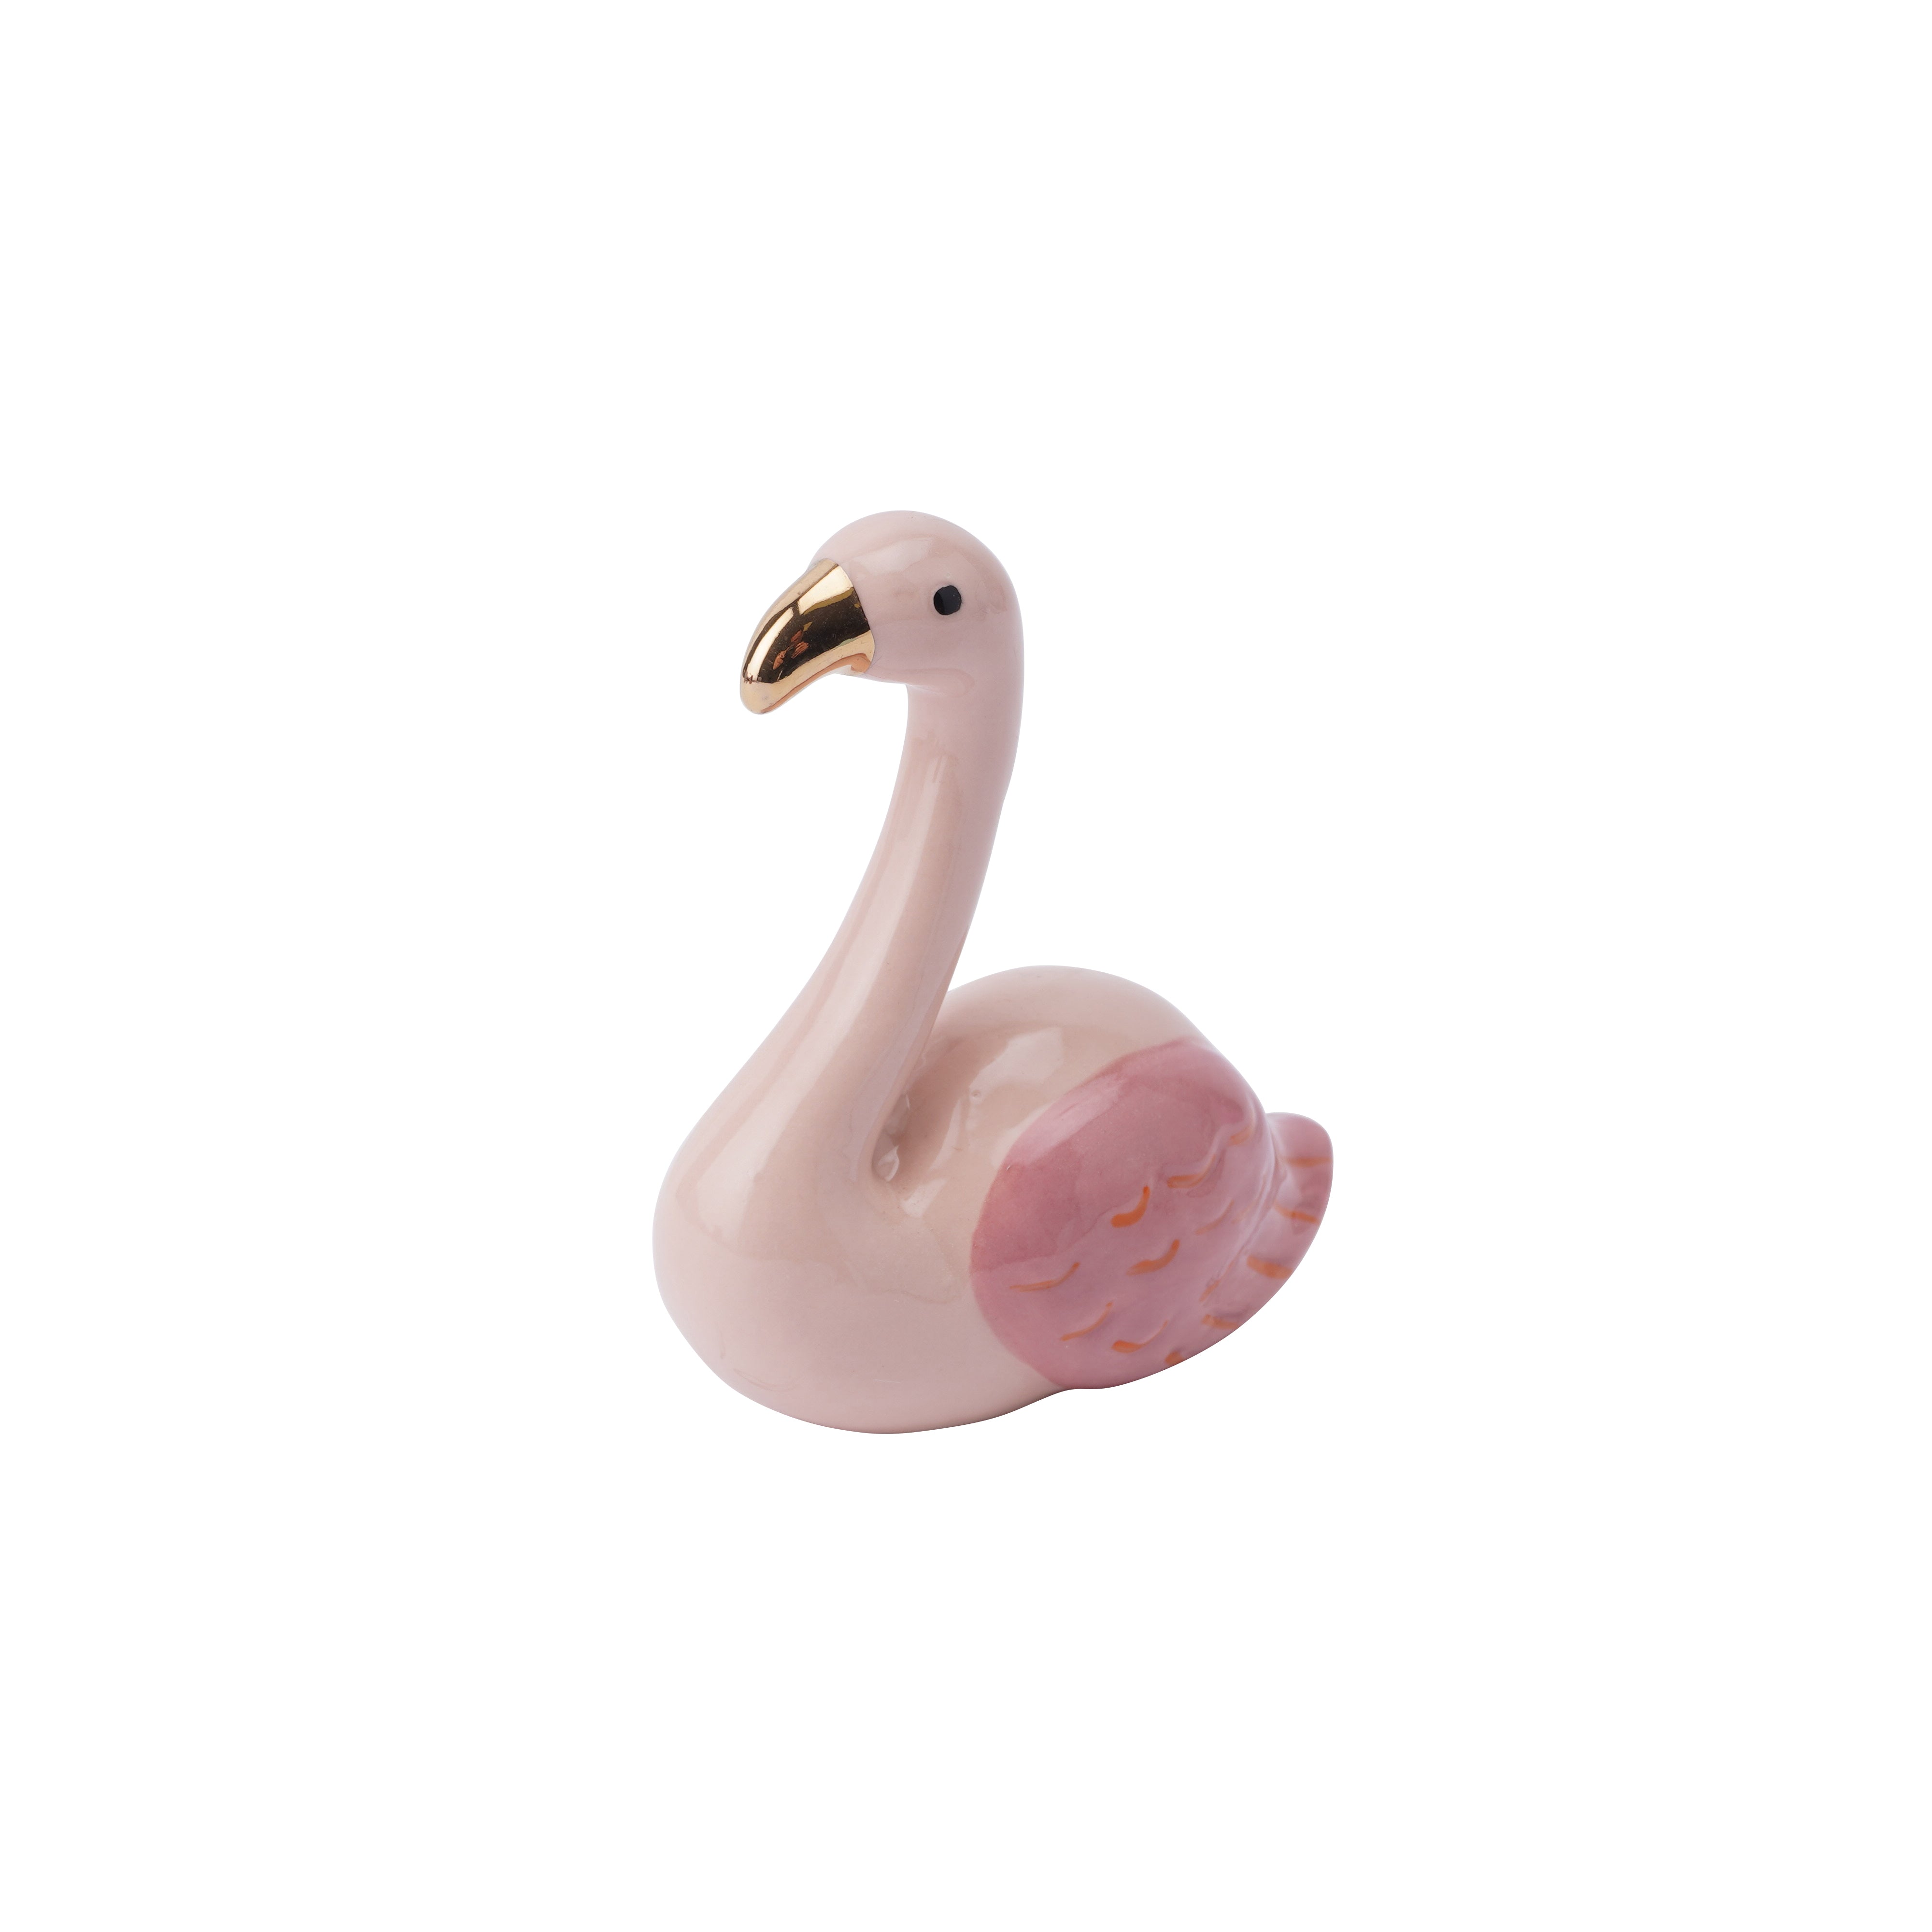 CGB Giftware Florence The Flamingo Ring Holder